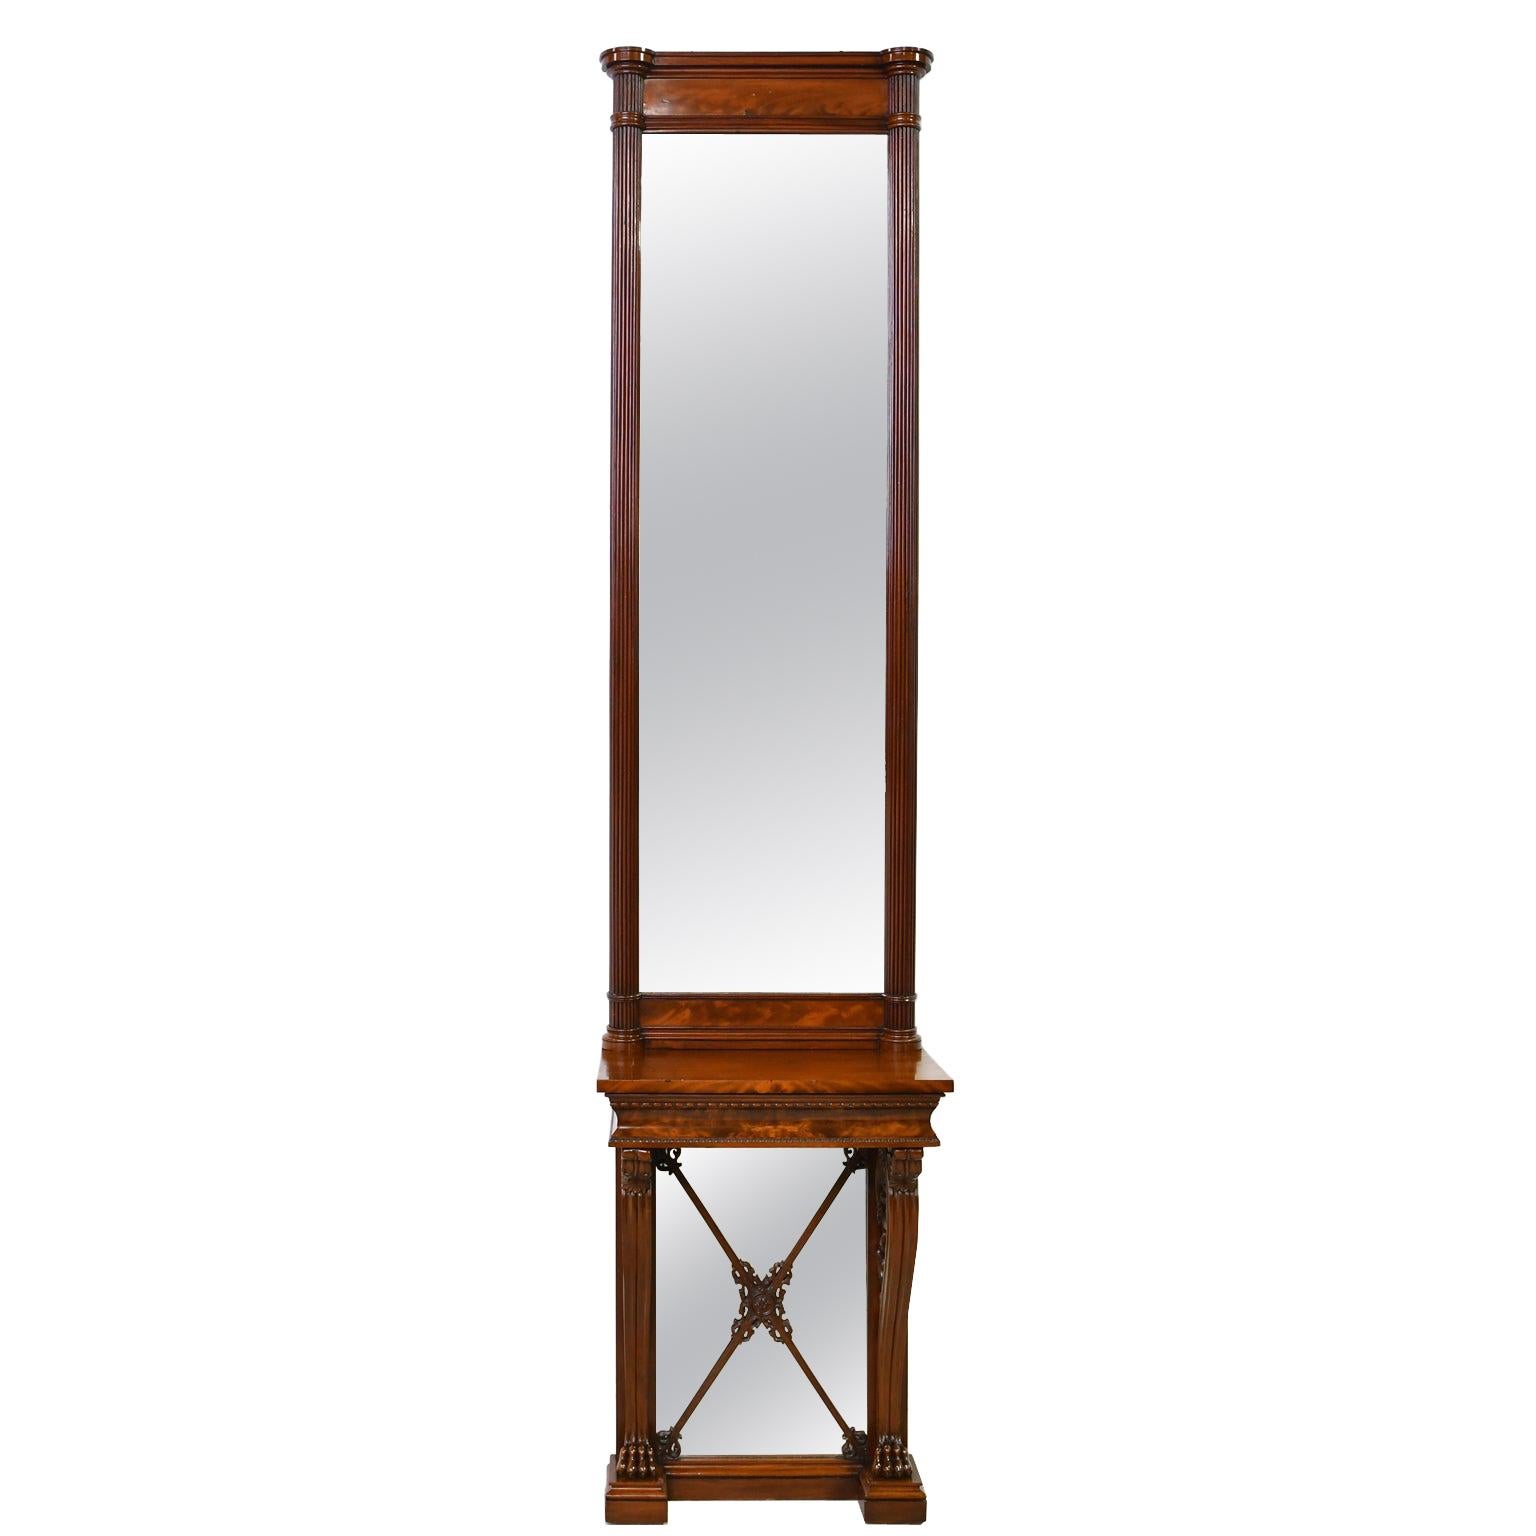 Tall Neoclassical-Style Console & Pier Mirror in Mahogany, Denmark, c. 1830